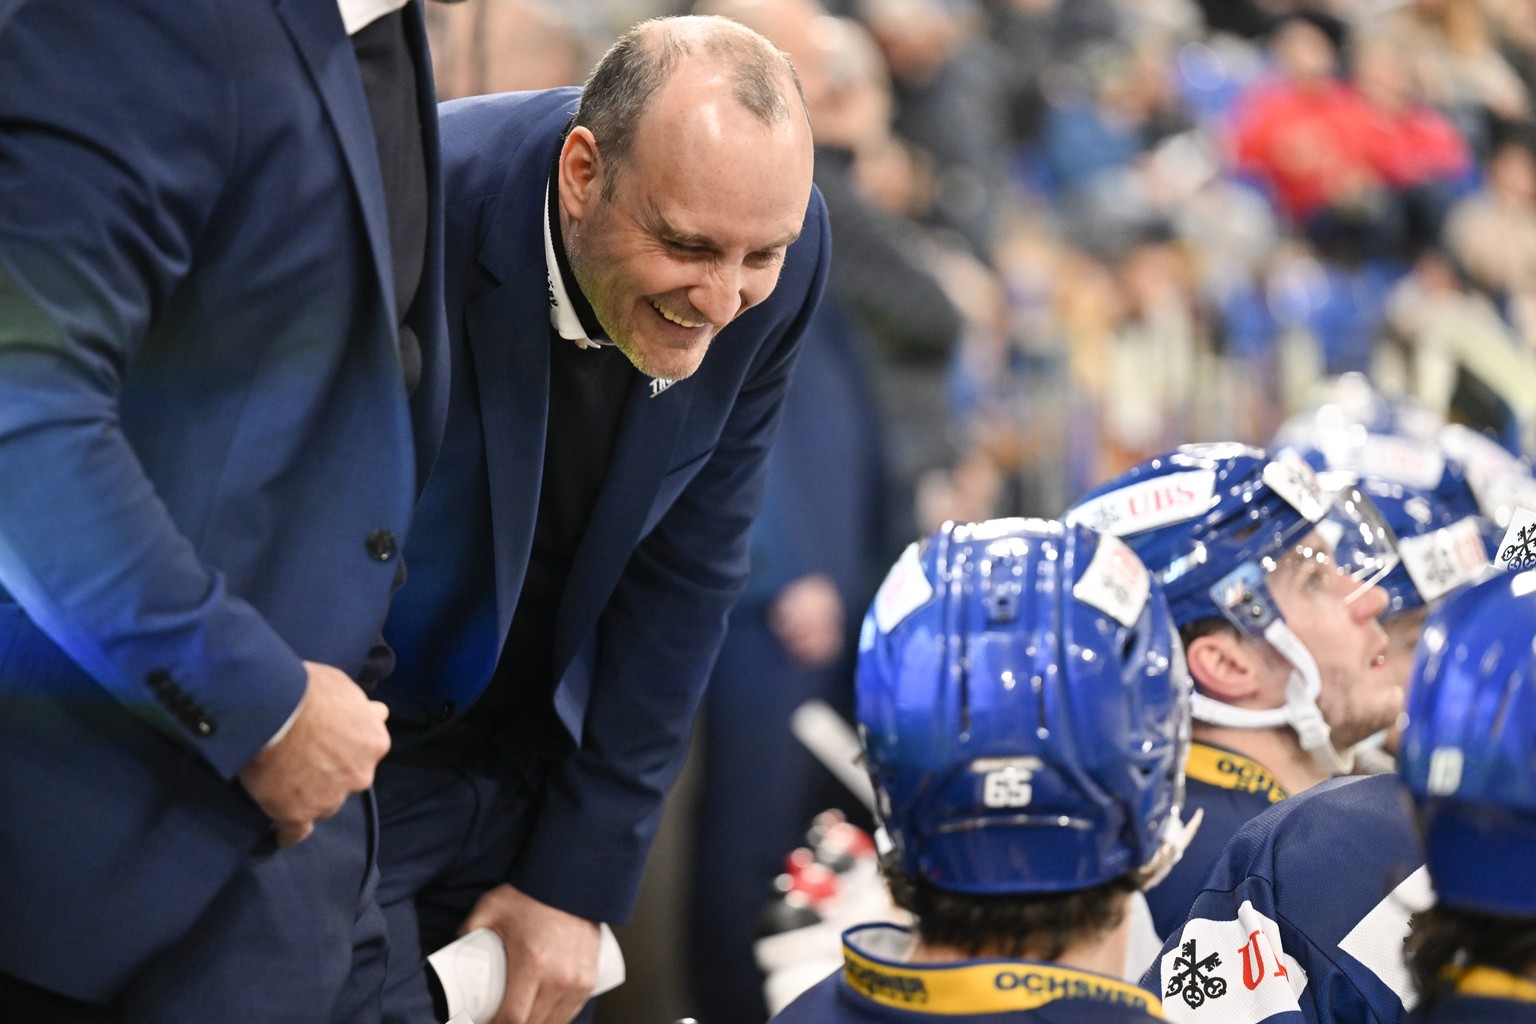 Davos&#039; head coach Christian Wohlwend during the game between Switzerland&#039;s HC Davos and Finland&#039;s IFK Helsinki, at the 94th Spengler Cup ice hockey tournament in Davos, Switzerland, Thu ...